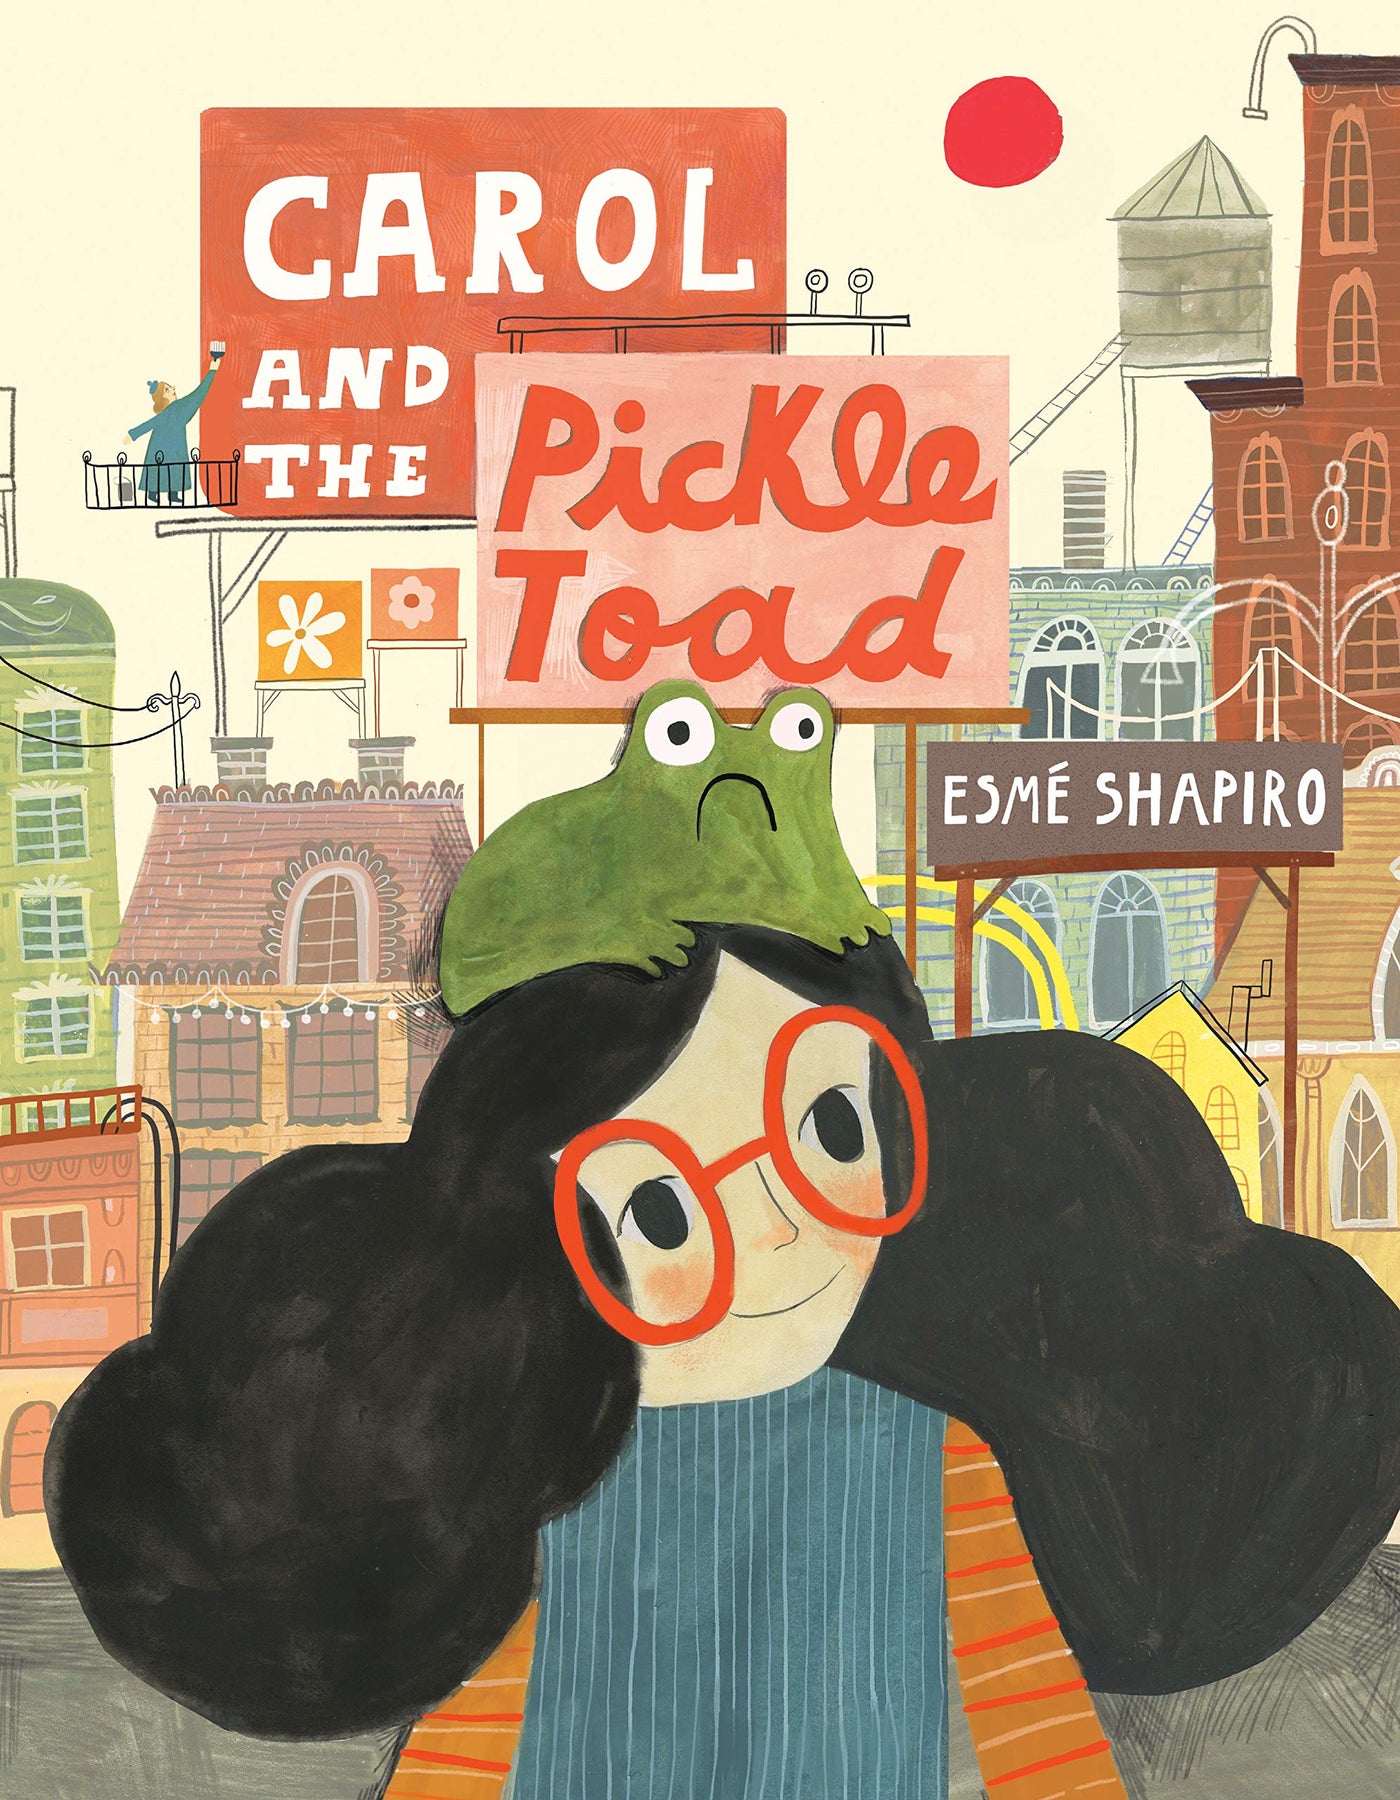 Carol & the Pickle-Toad